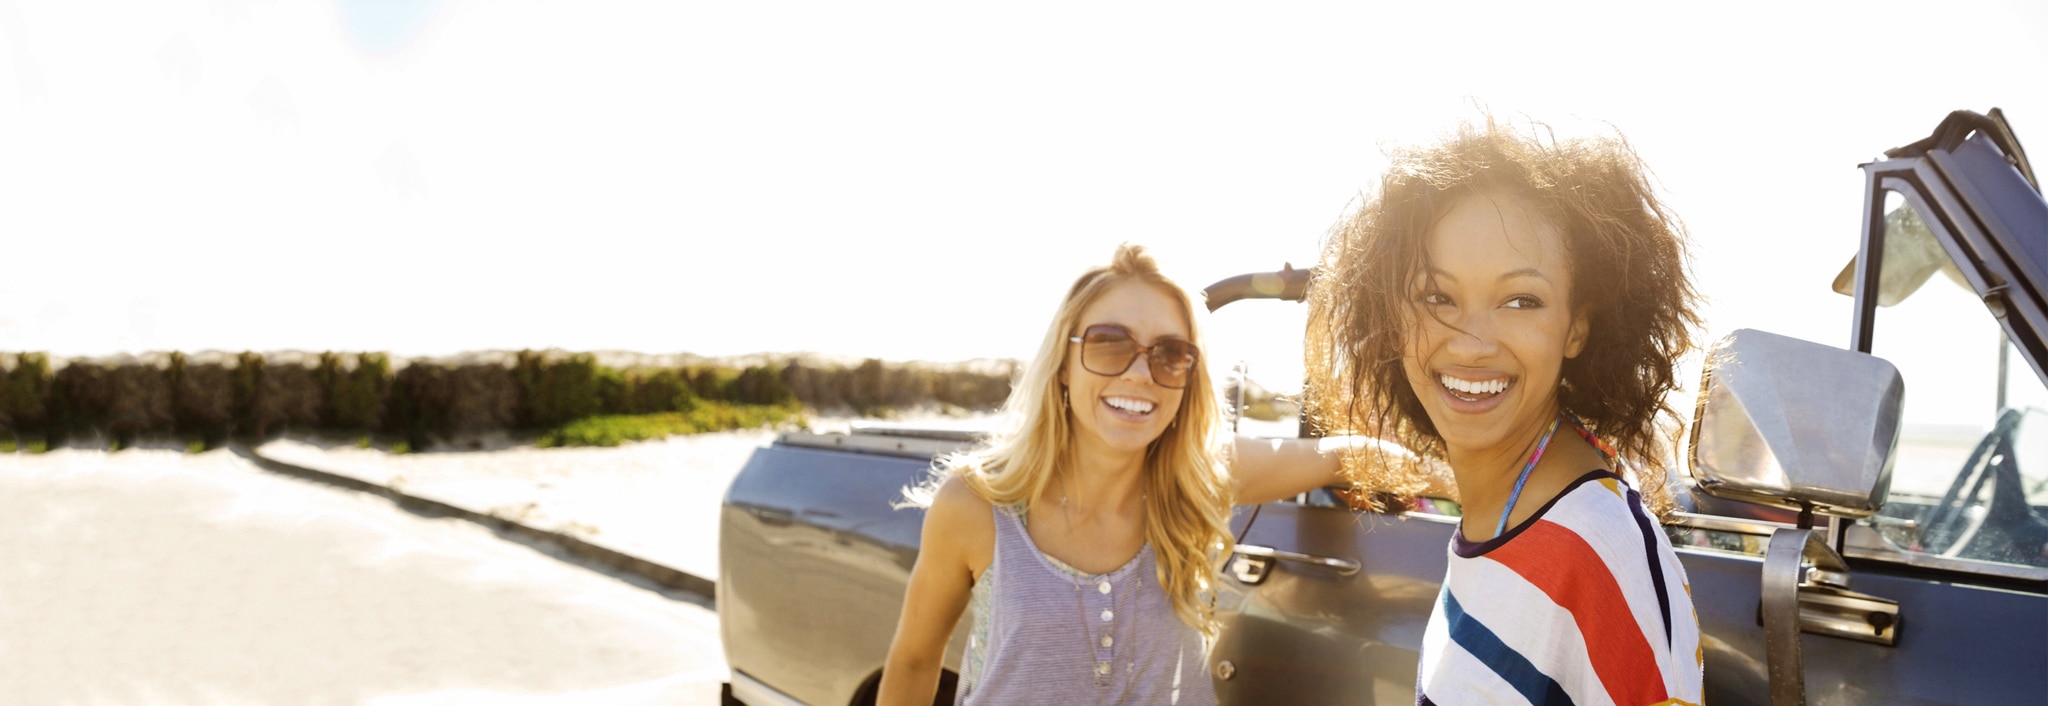 Two women smiling, one with smooth, dry hair and the other one with curly, dry hair, next to a car.